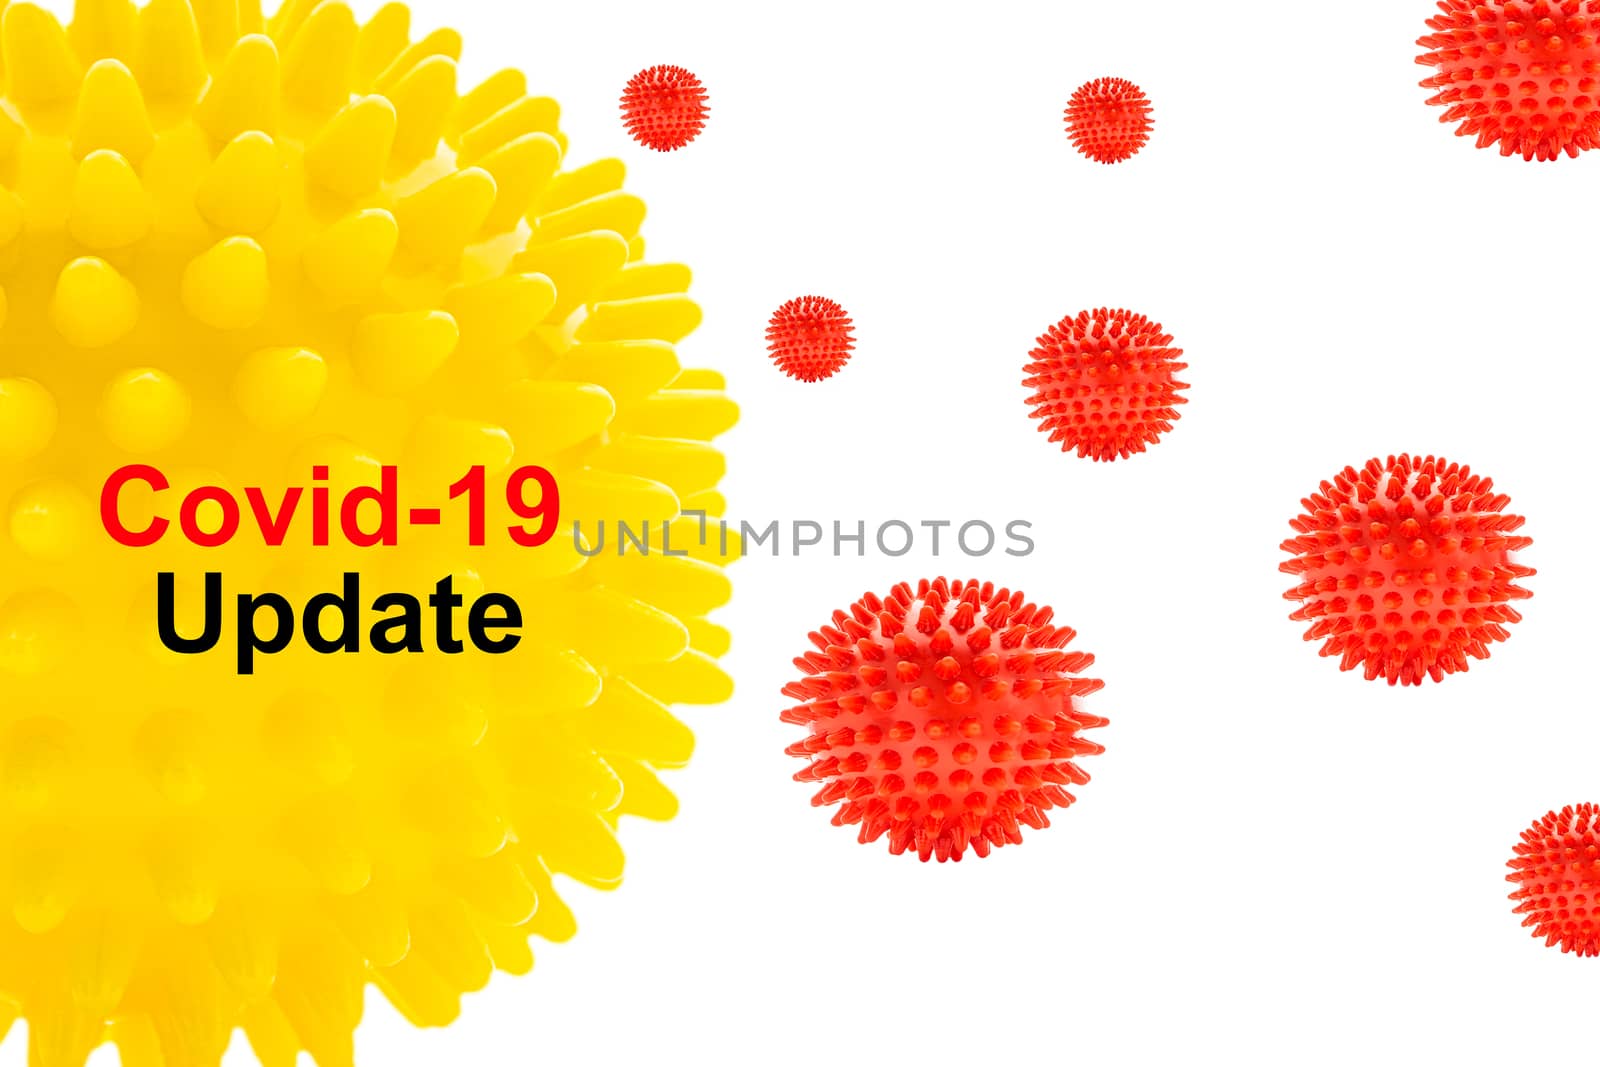 COVID-19 UPDATE text on white background. Covid-19 or Coronavirus